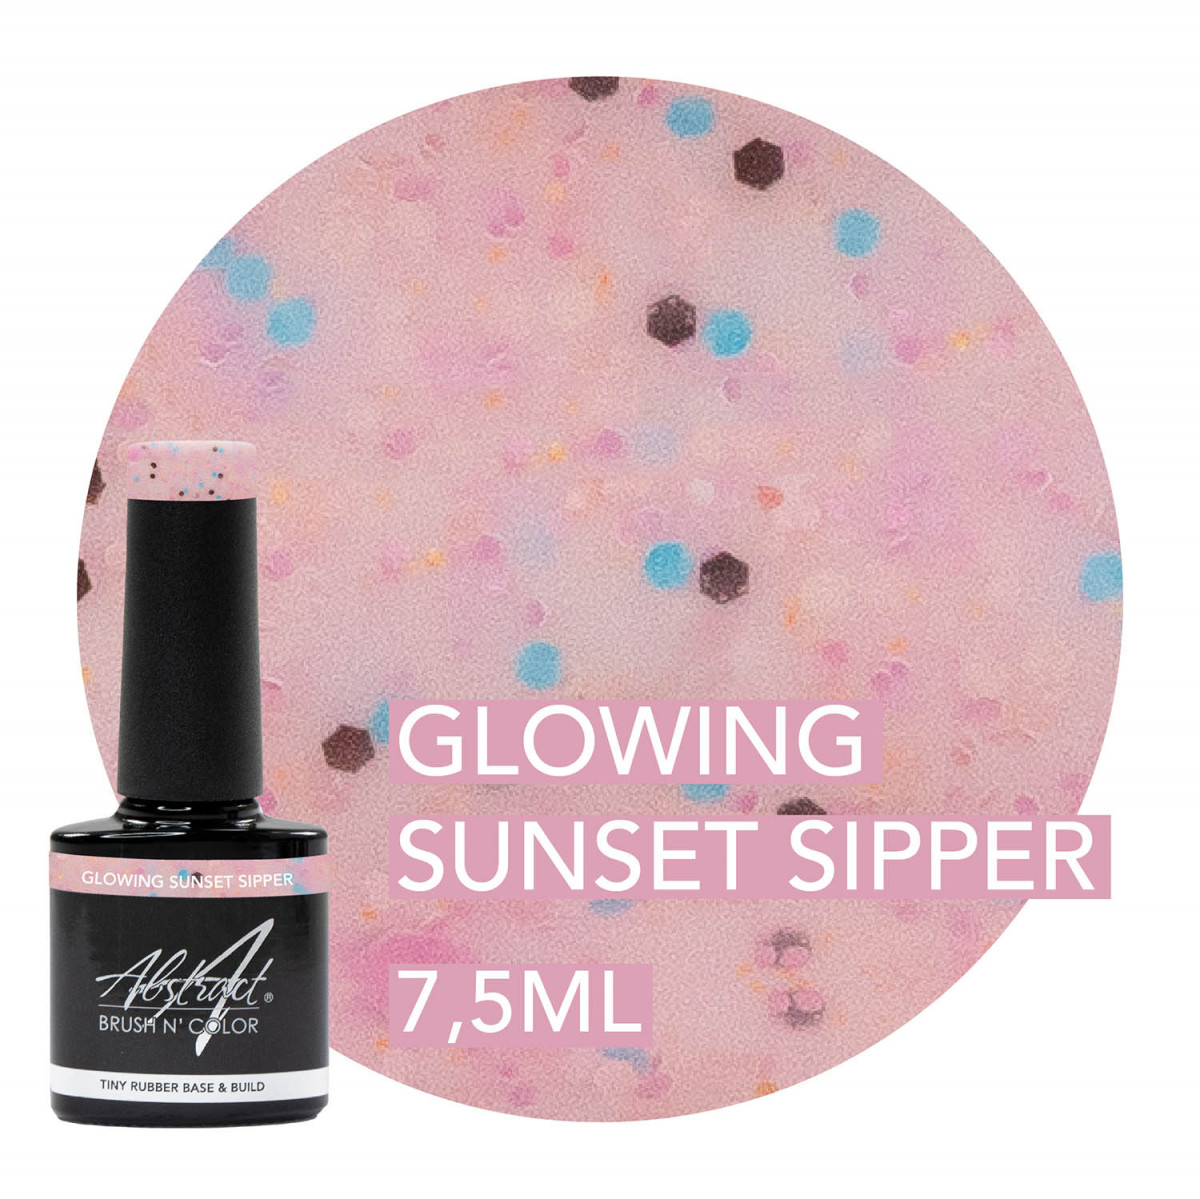 PRE-COMMANDE Glowing Sunset Sipper - TINY Rubber Base & Build Gel Abstract